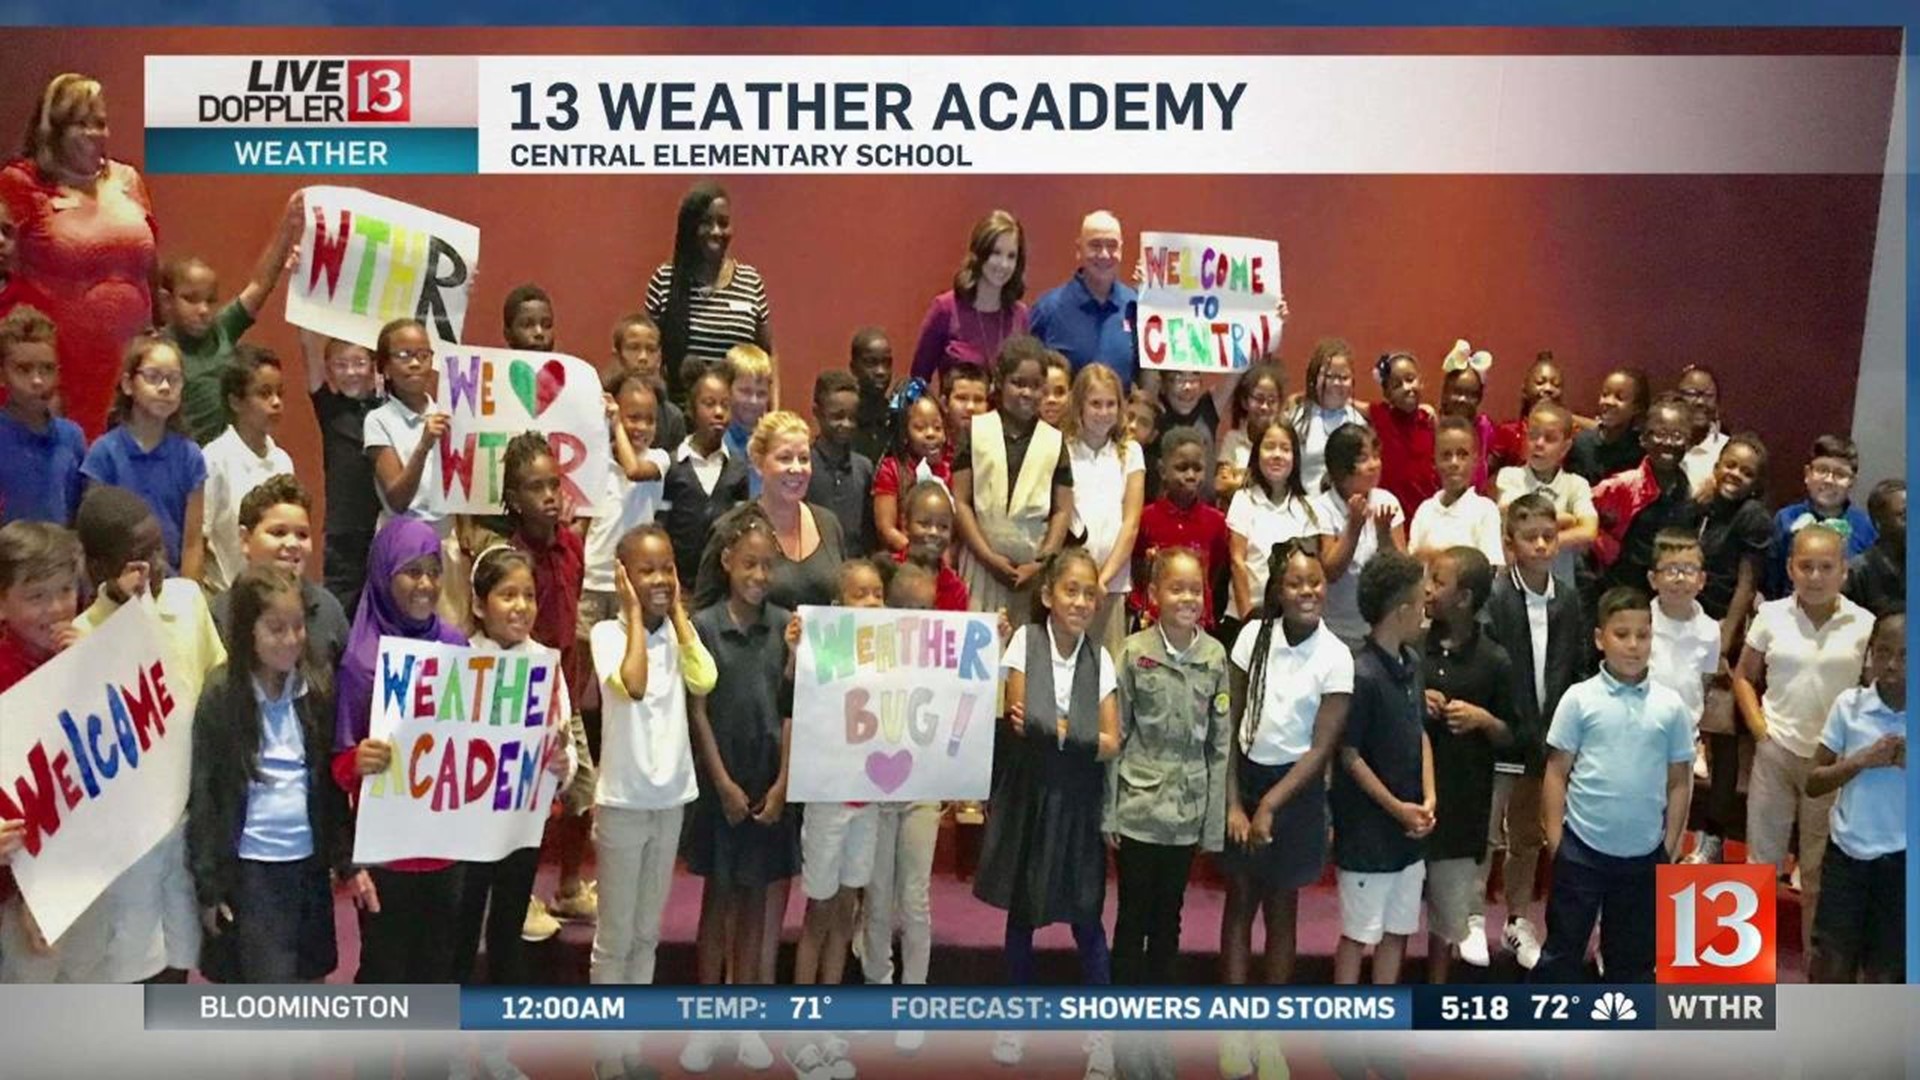 13 Weather Academy at Central Elementary